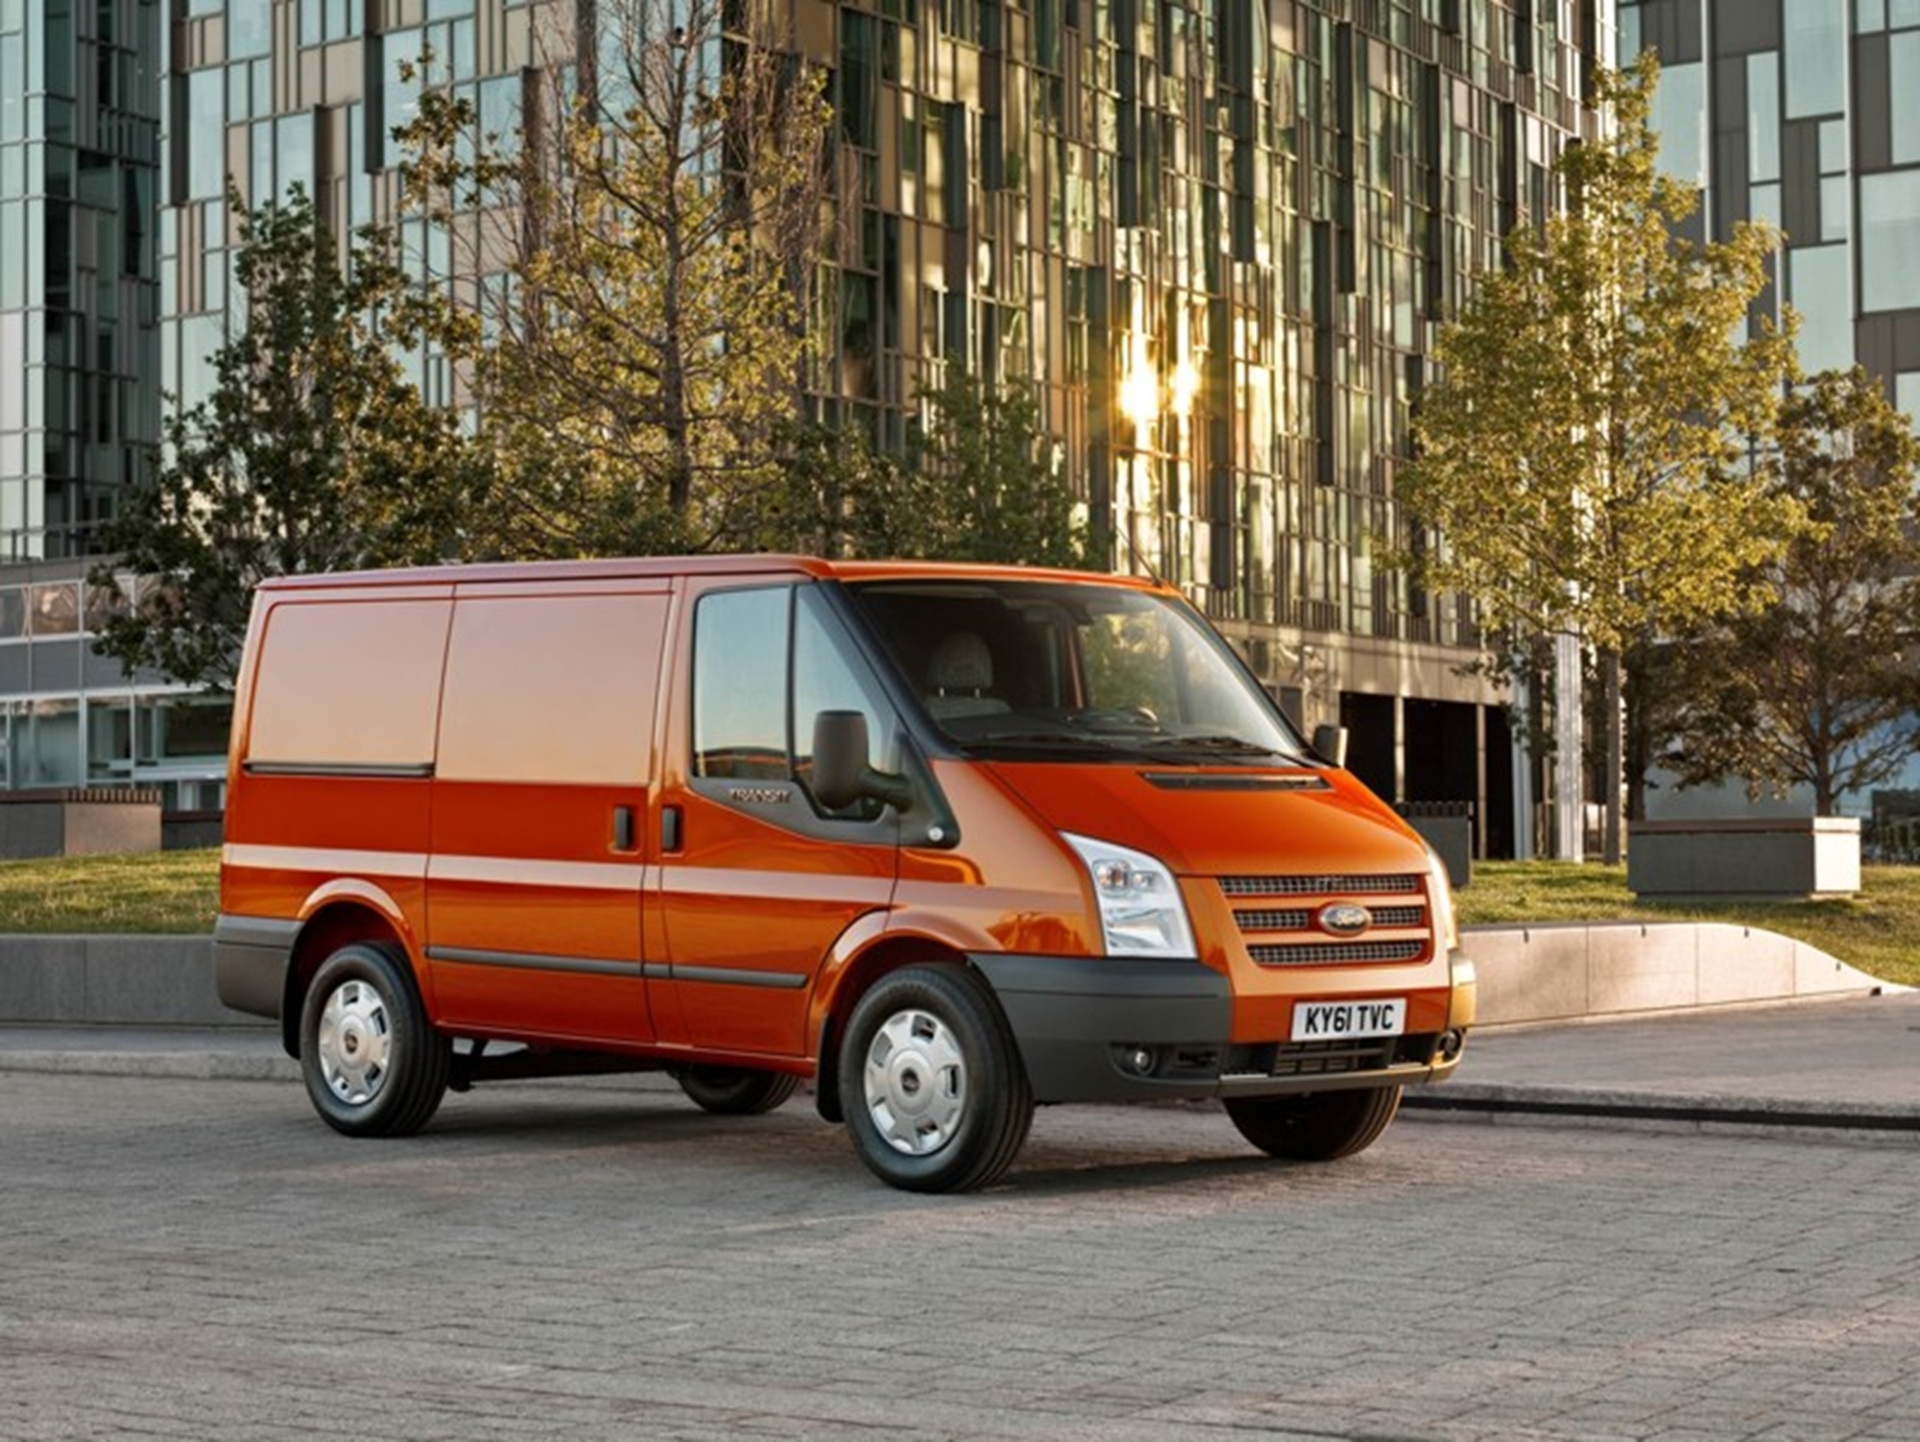 FORD TRANSIT WINS BEST MEDIUM COMMERCIAL VEHICLE FROM WHAT VAN?